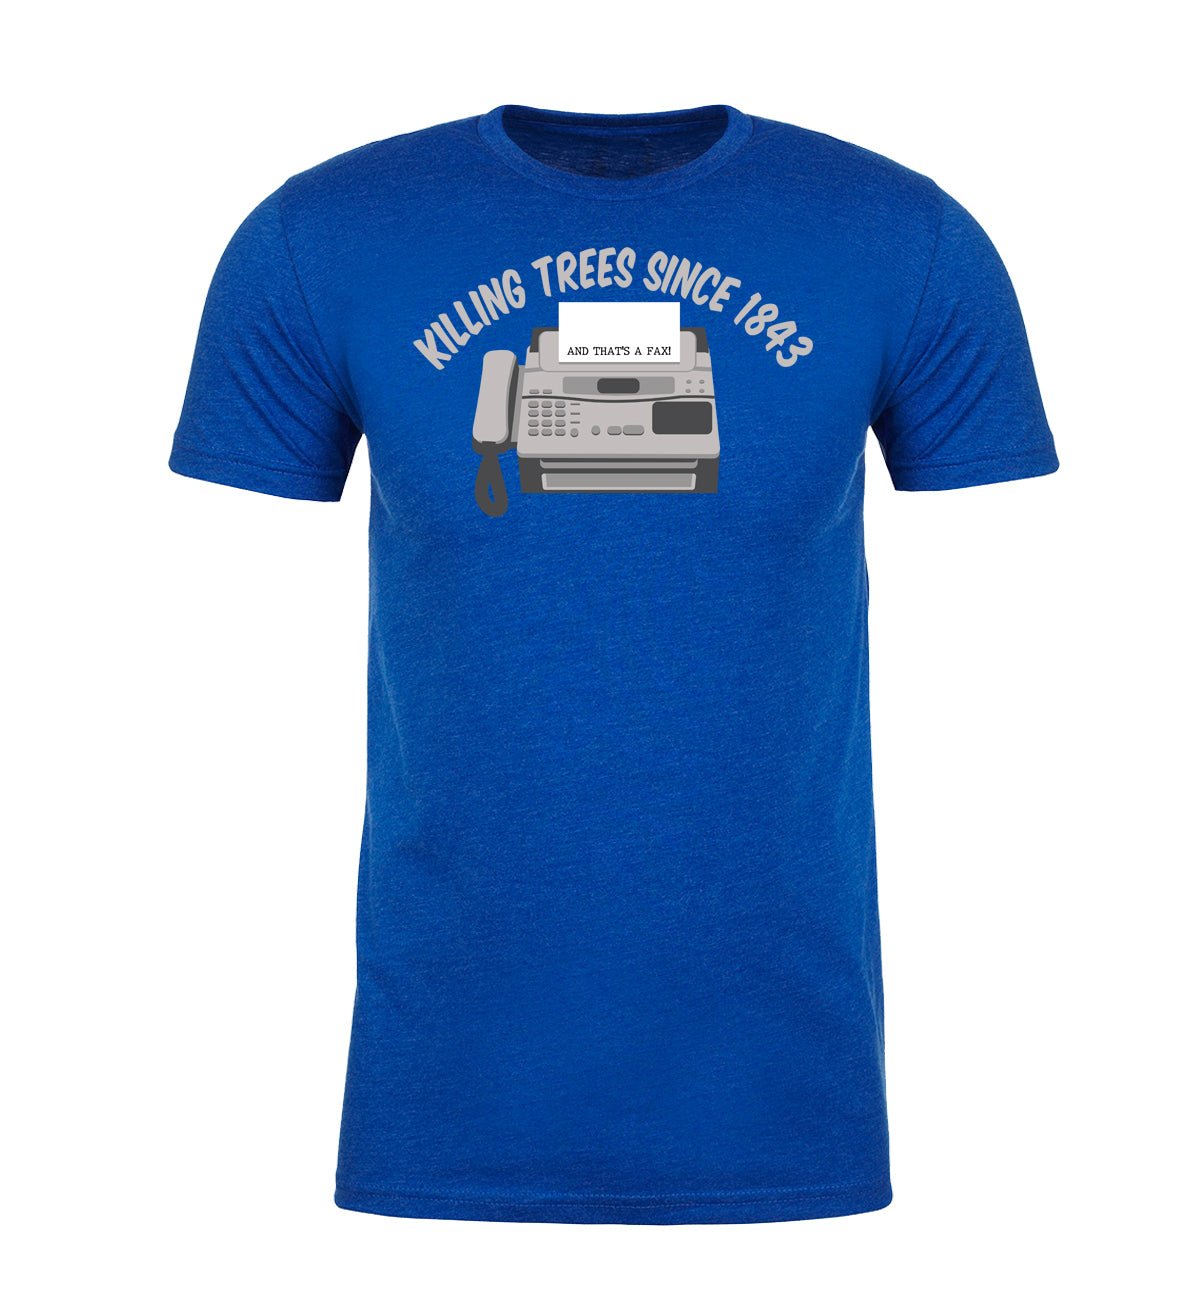 Killing Trees Since 1843 and That's a Fax! Unisex T Shirts - Mato & Hash